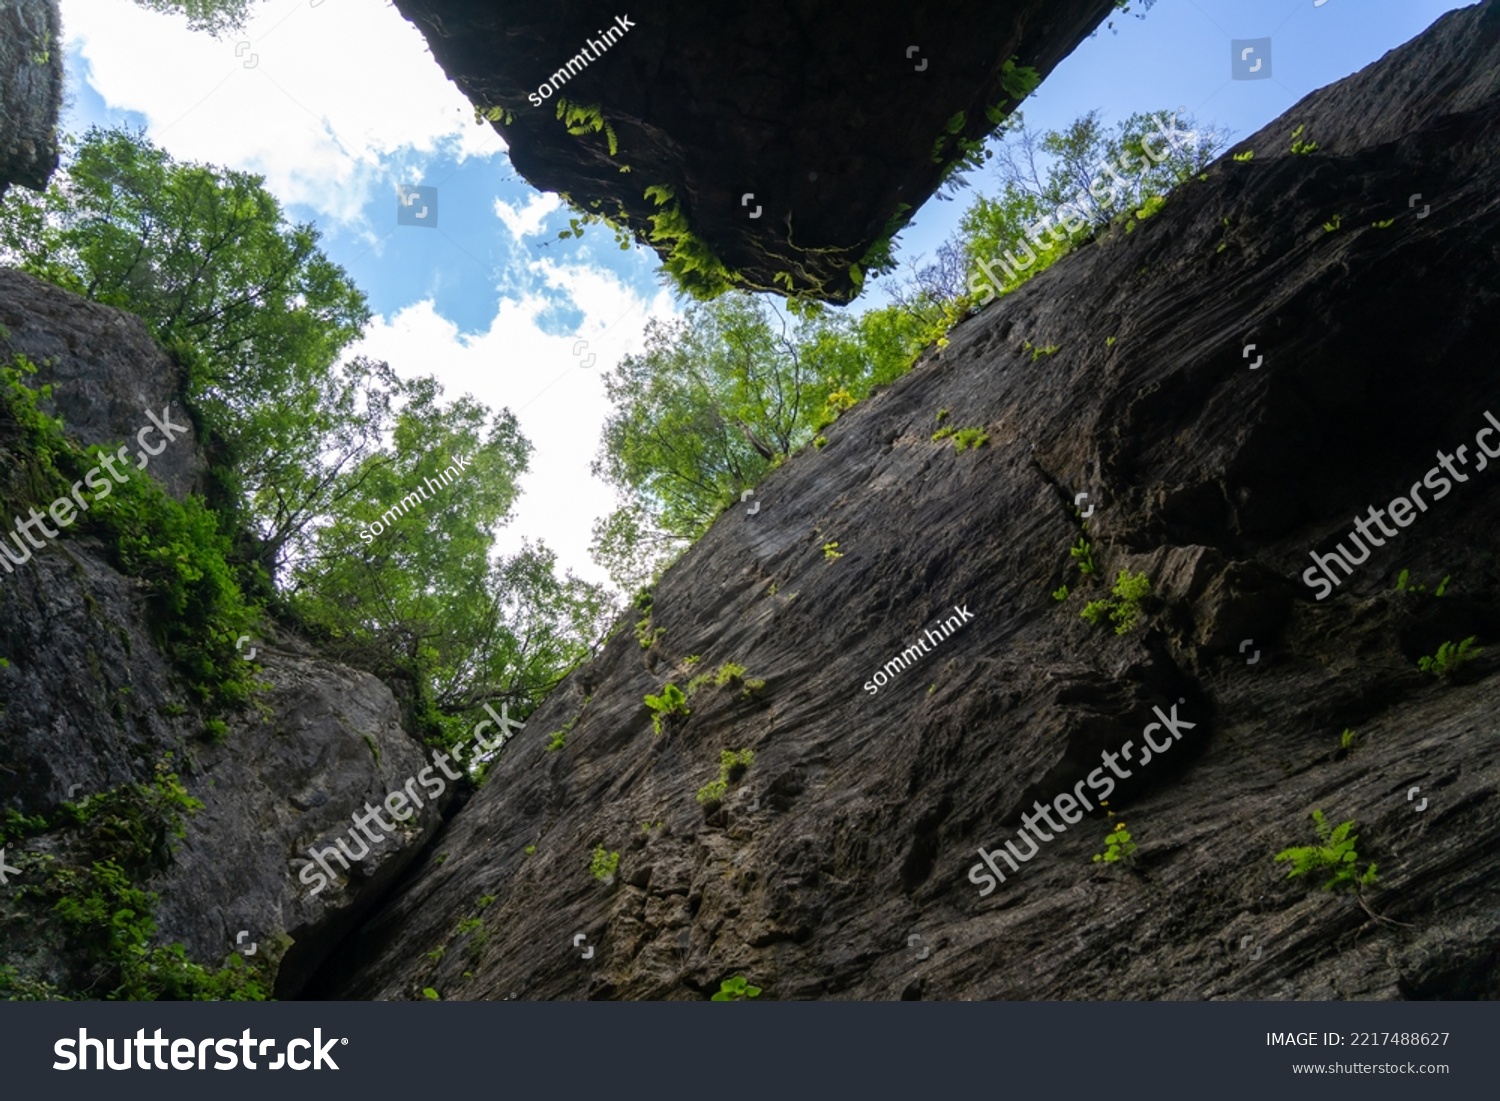 View from below from the crevice on the steep overhanging walls of rocks and trees against the sky #2217488627